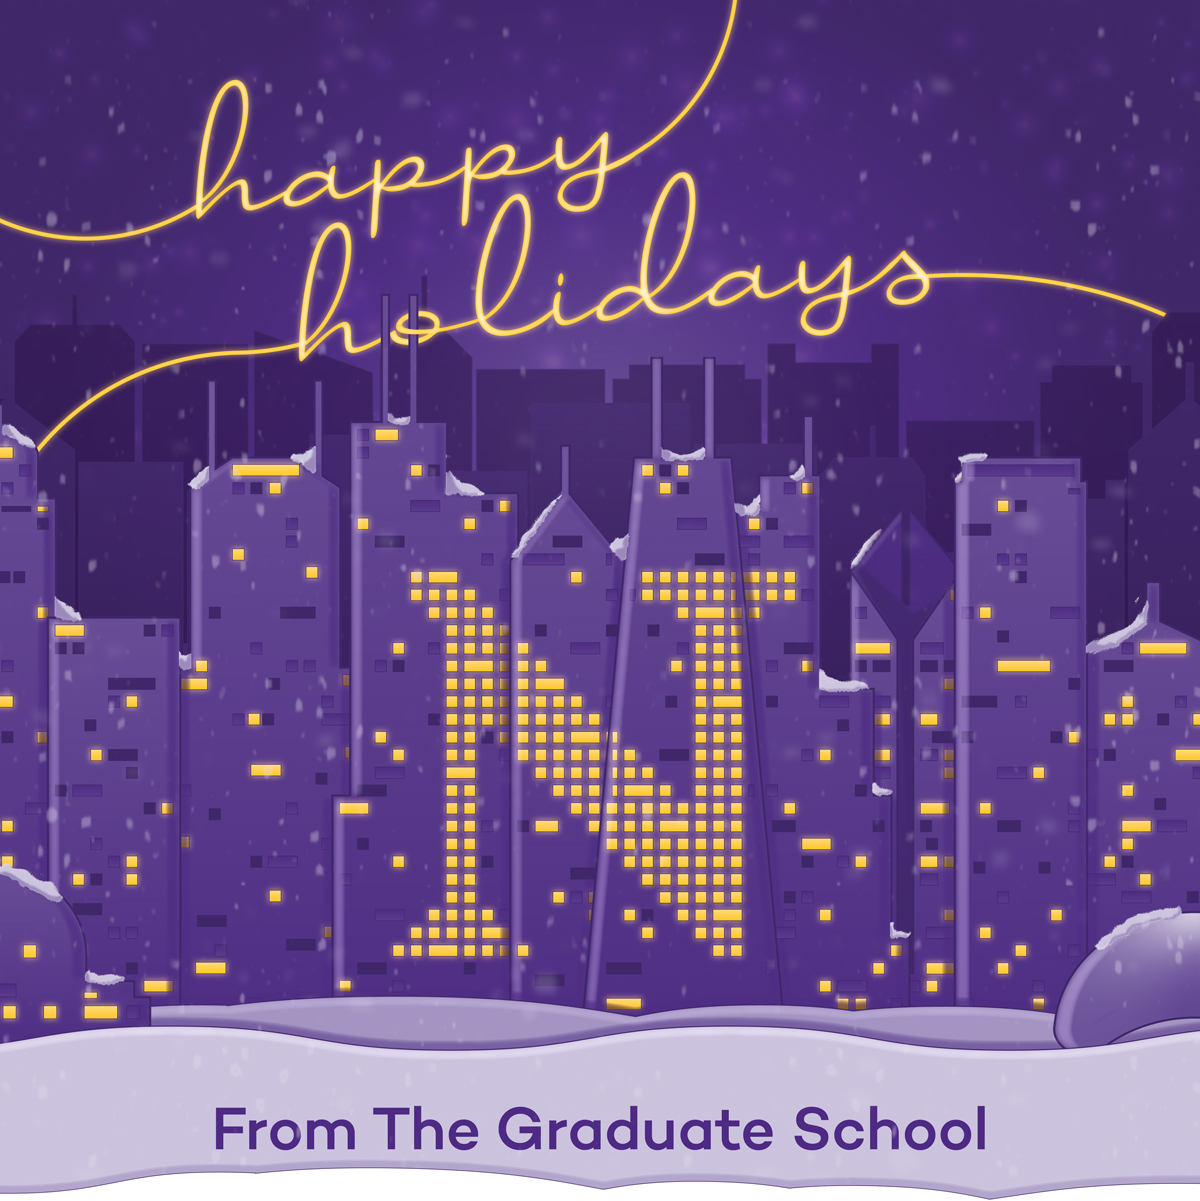 Happy Holidays from The Graduate School